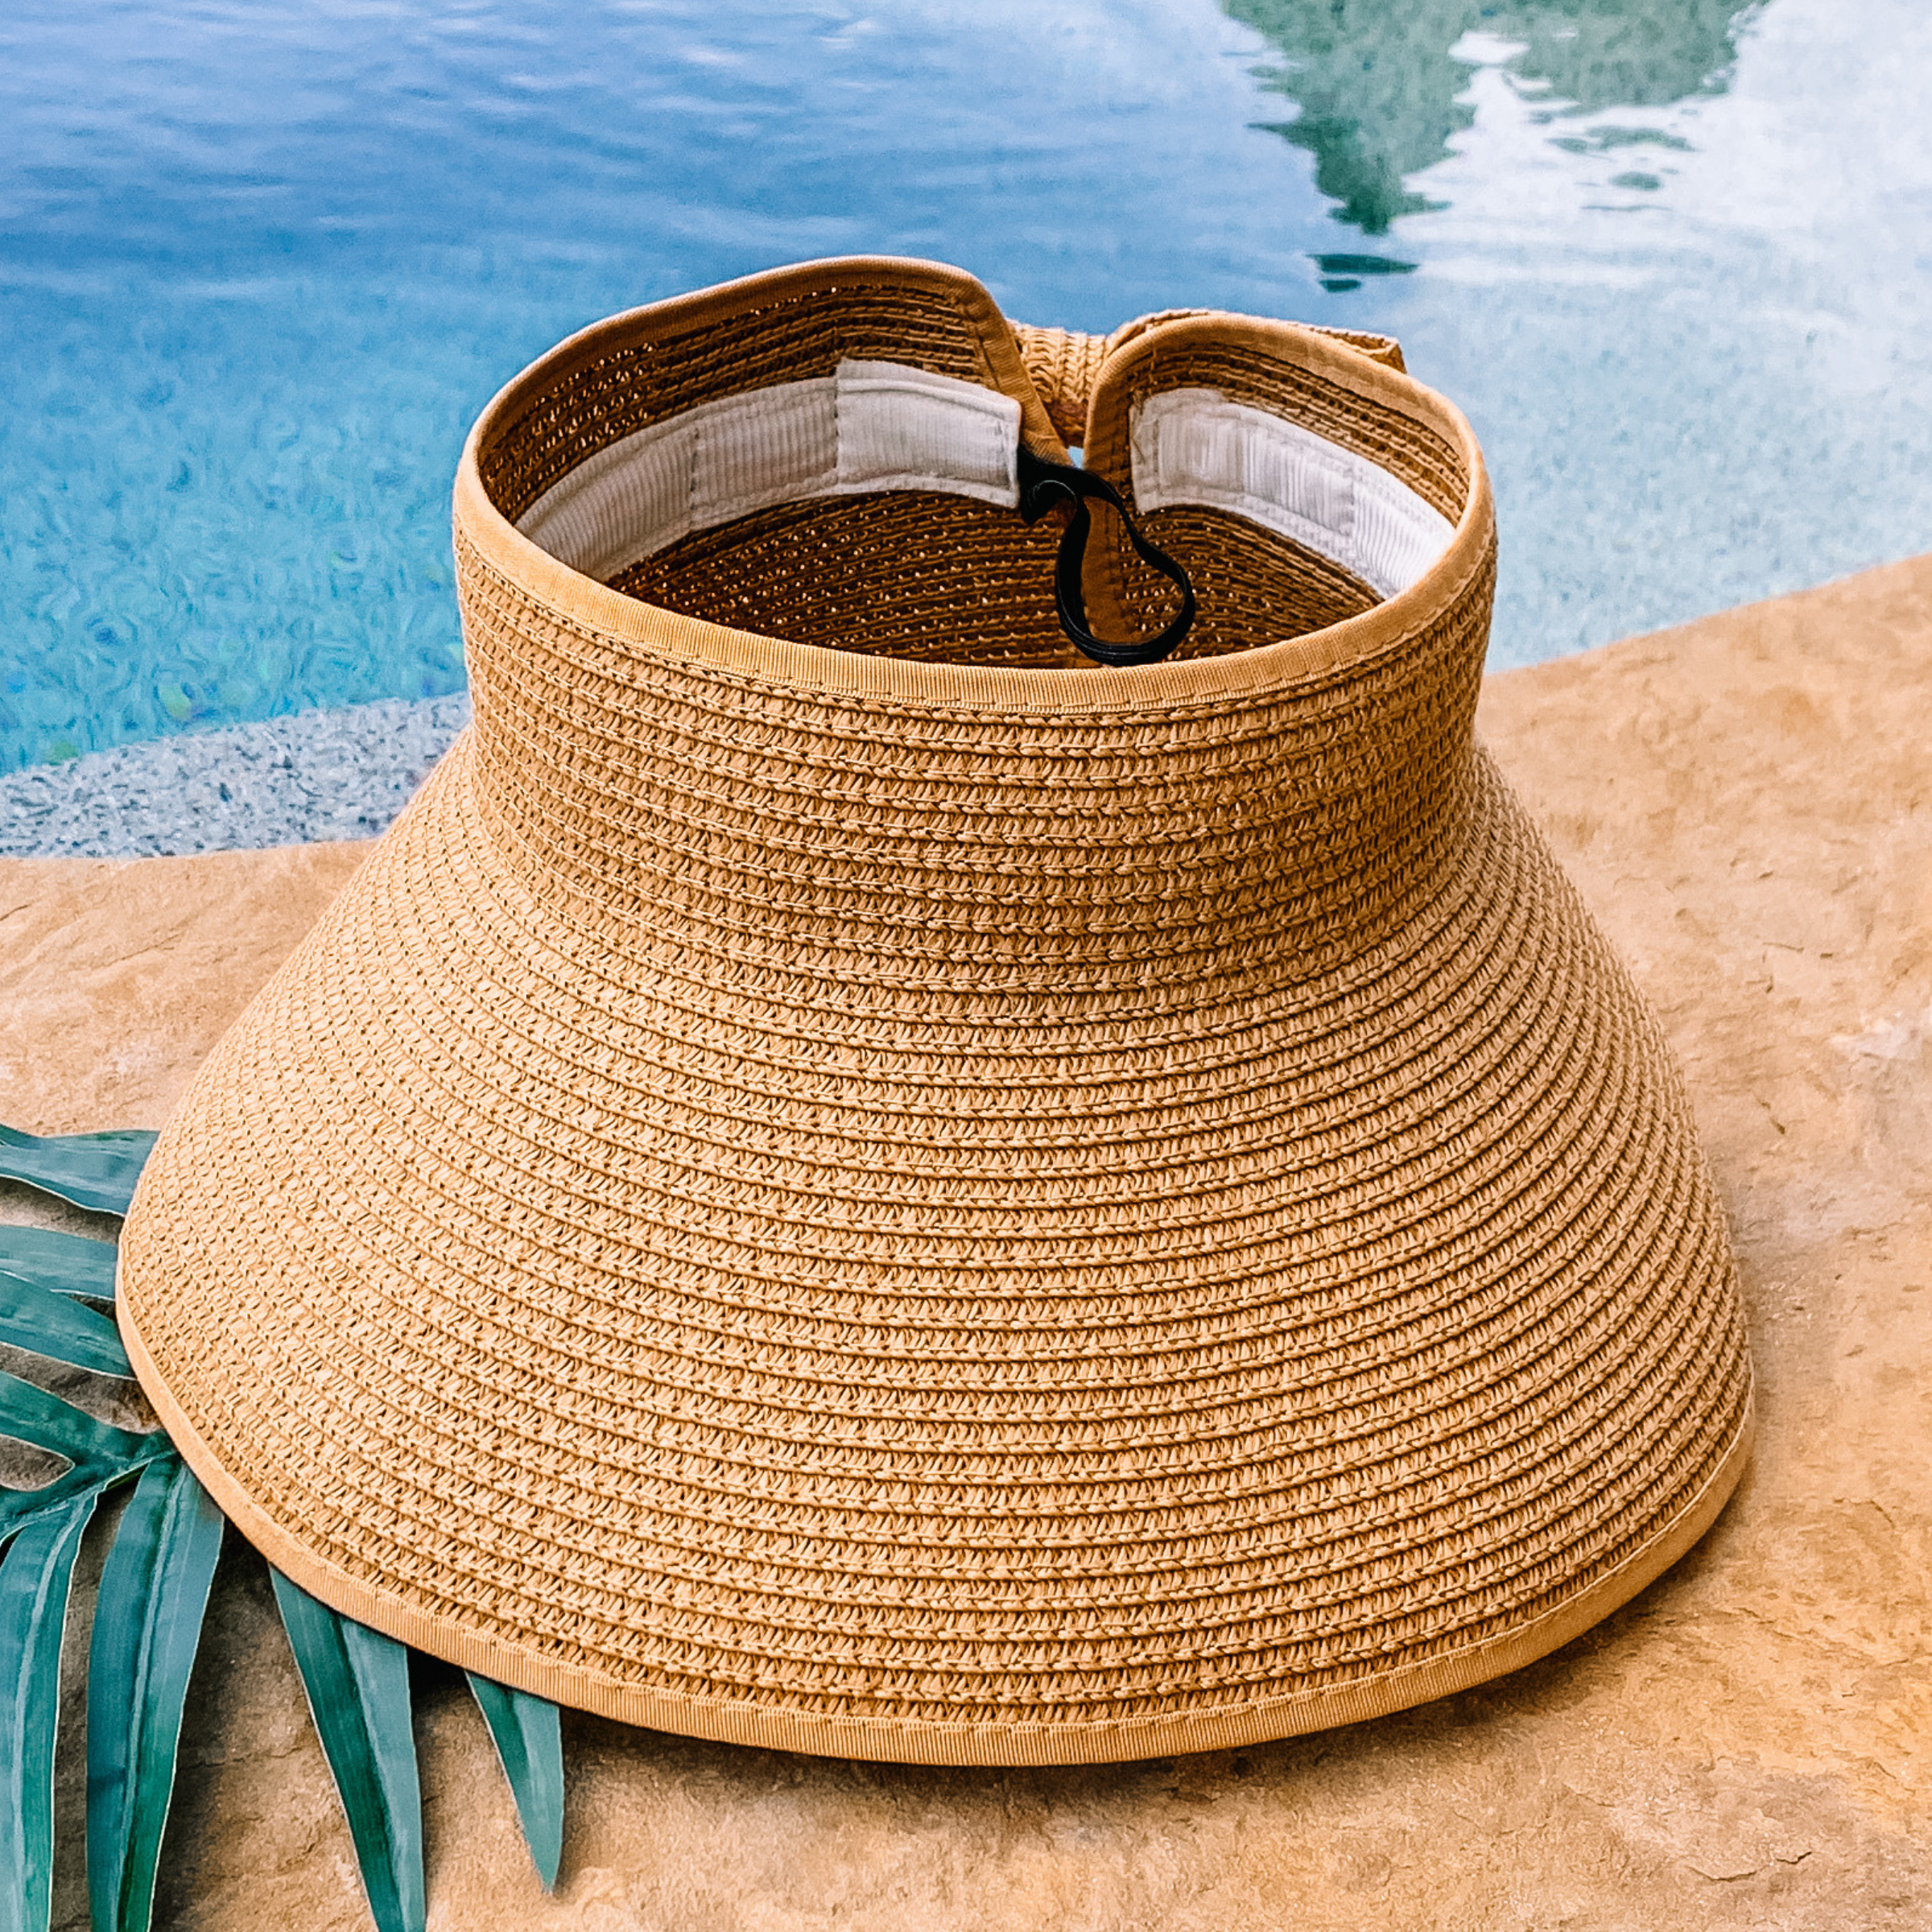 Tan, woven velcro visor that is pictured with a green leaf under it. This visor is pictured on a a tan rock in front of a pool.